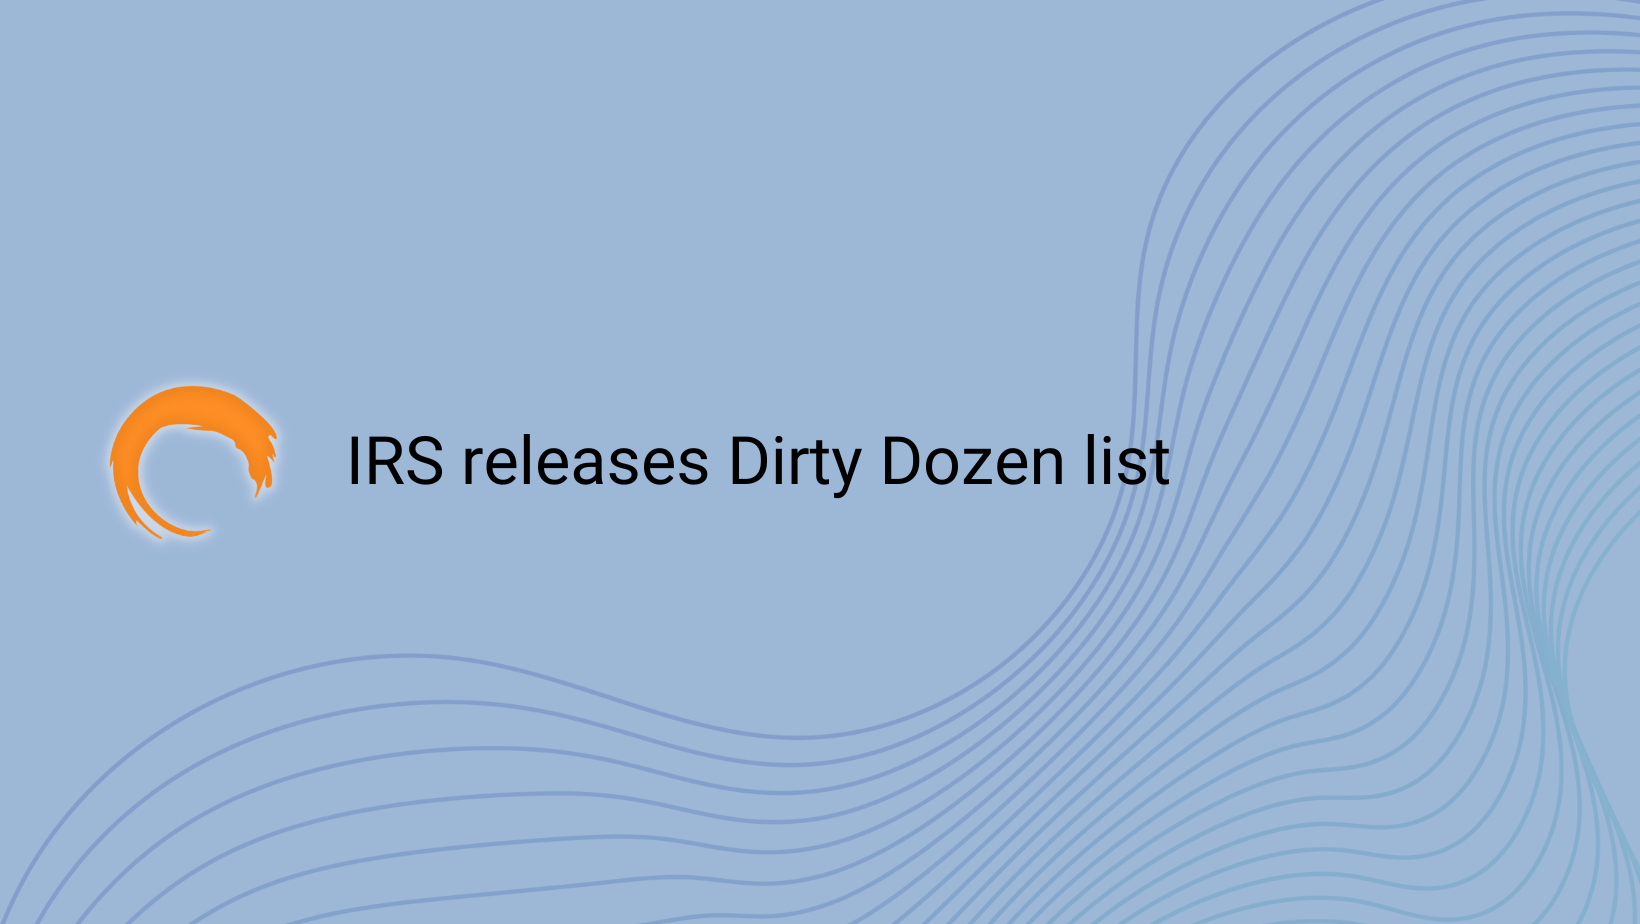 irs-releases-dirty-dozen-list-for-taxpayers